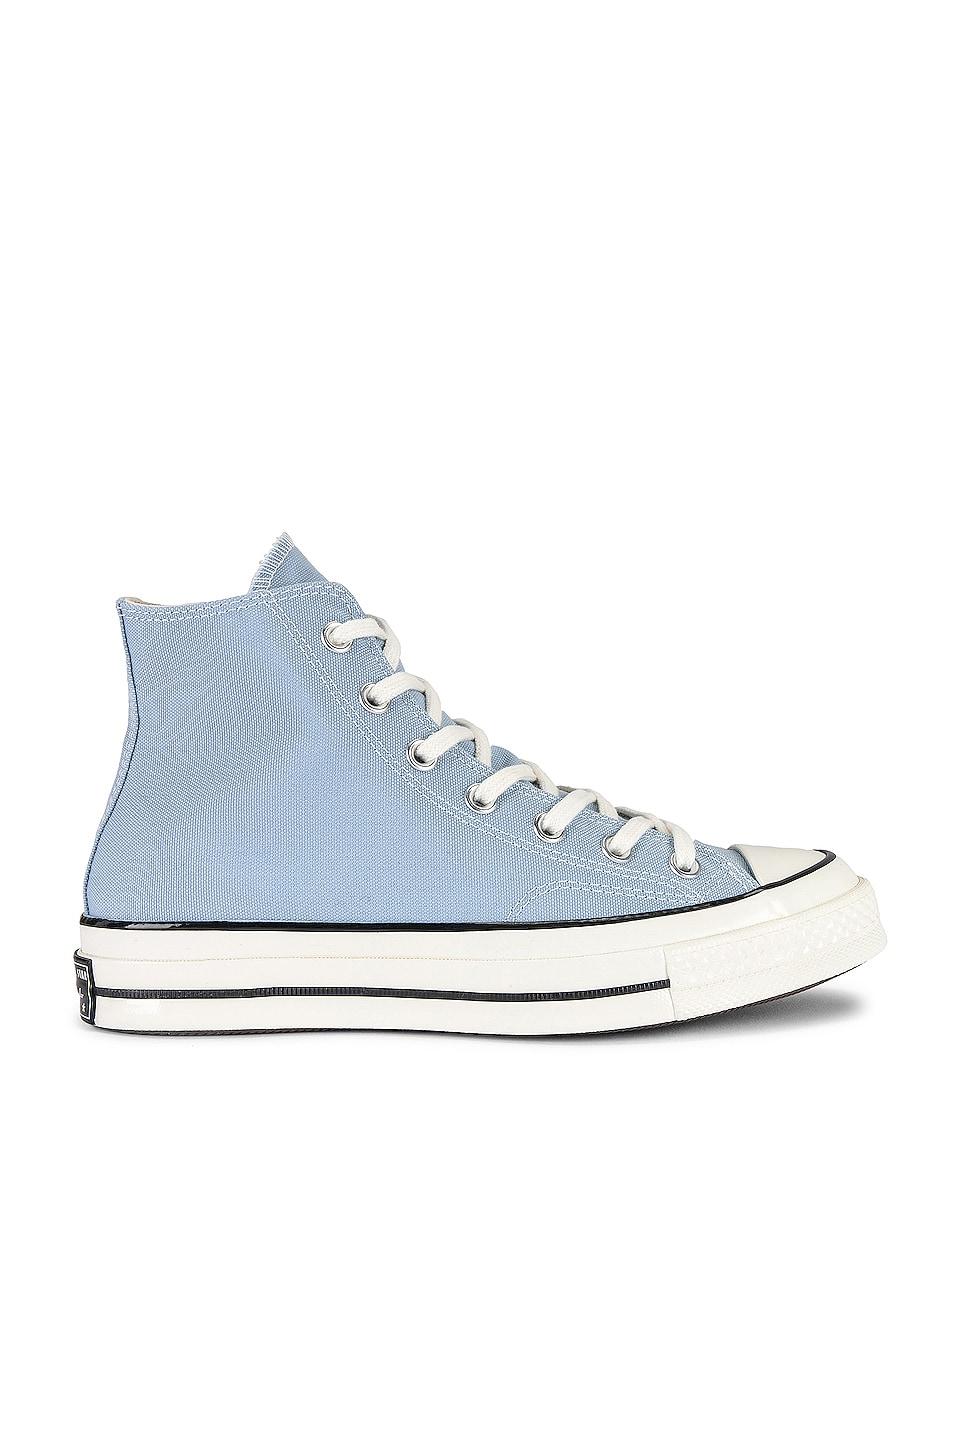 Converse Chuck 70 No Waste Canvas Sneaker in Blue | Lyst